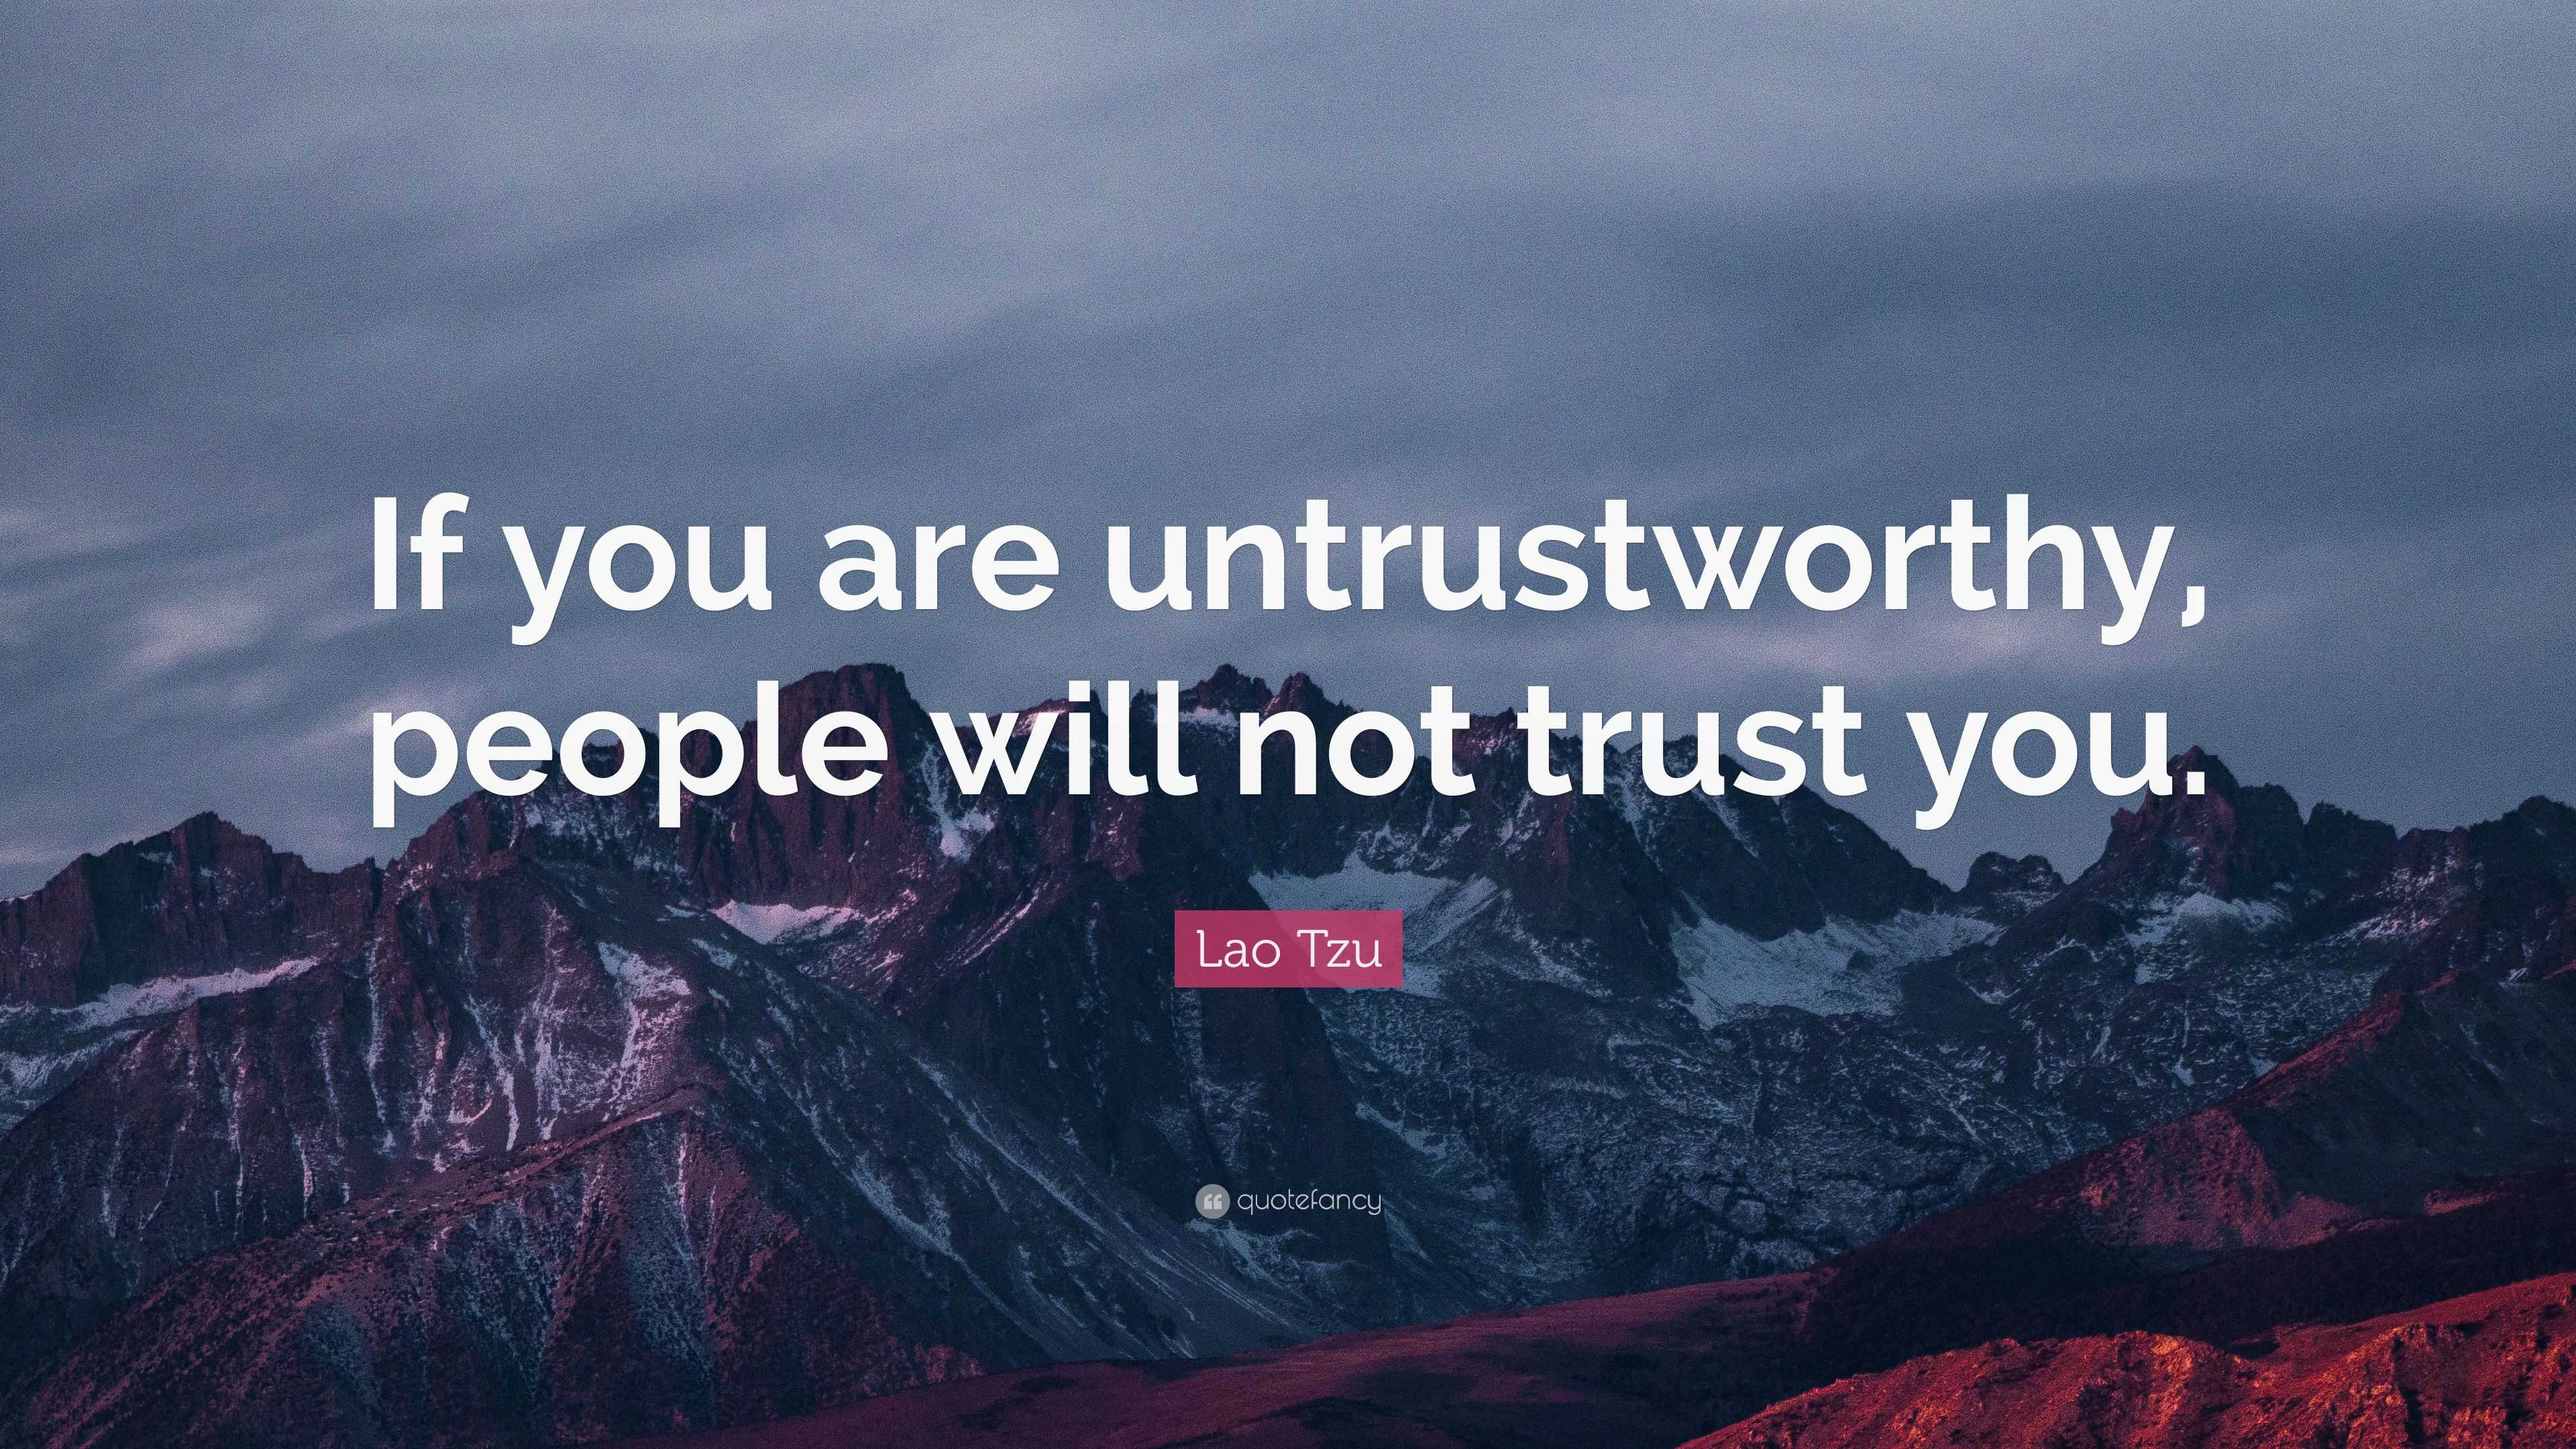 Lao Tzu Quote: “If you are untrustworthy, people will not trust you ...